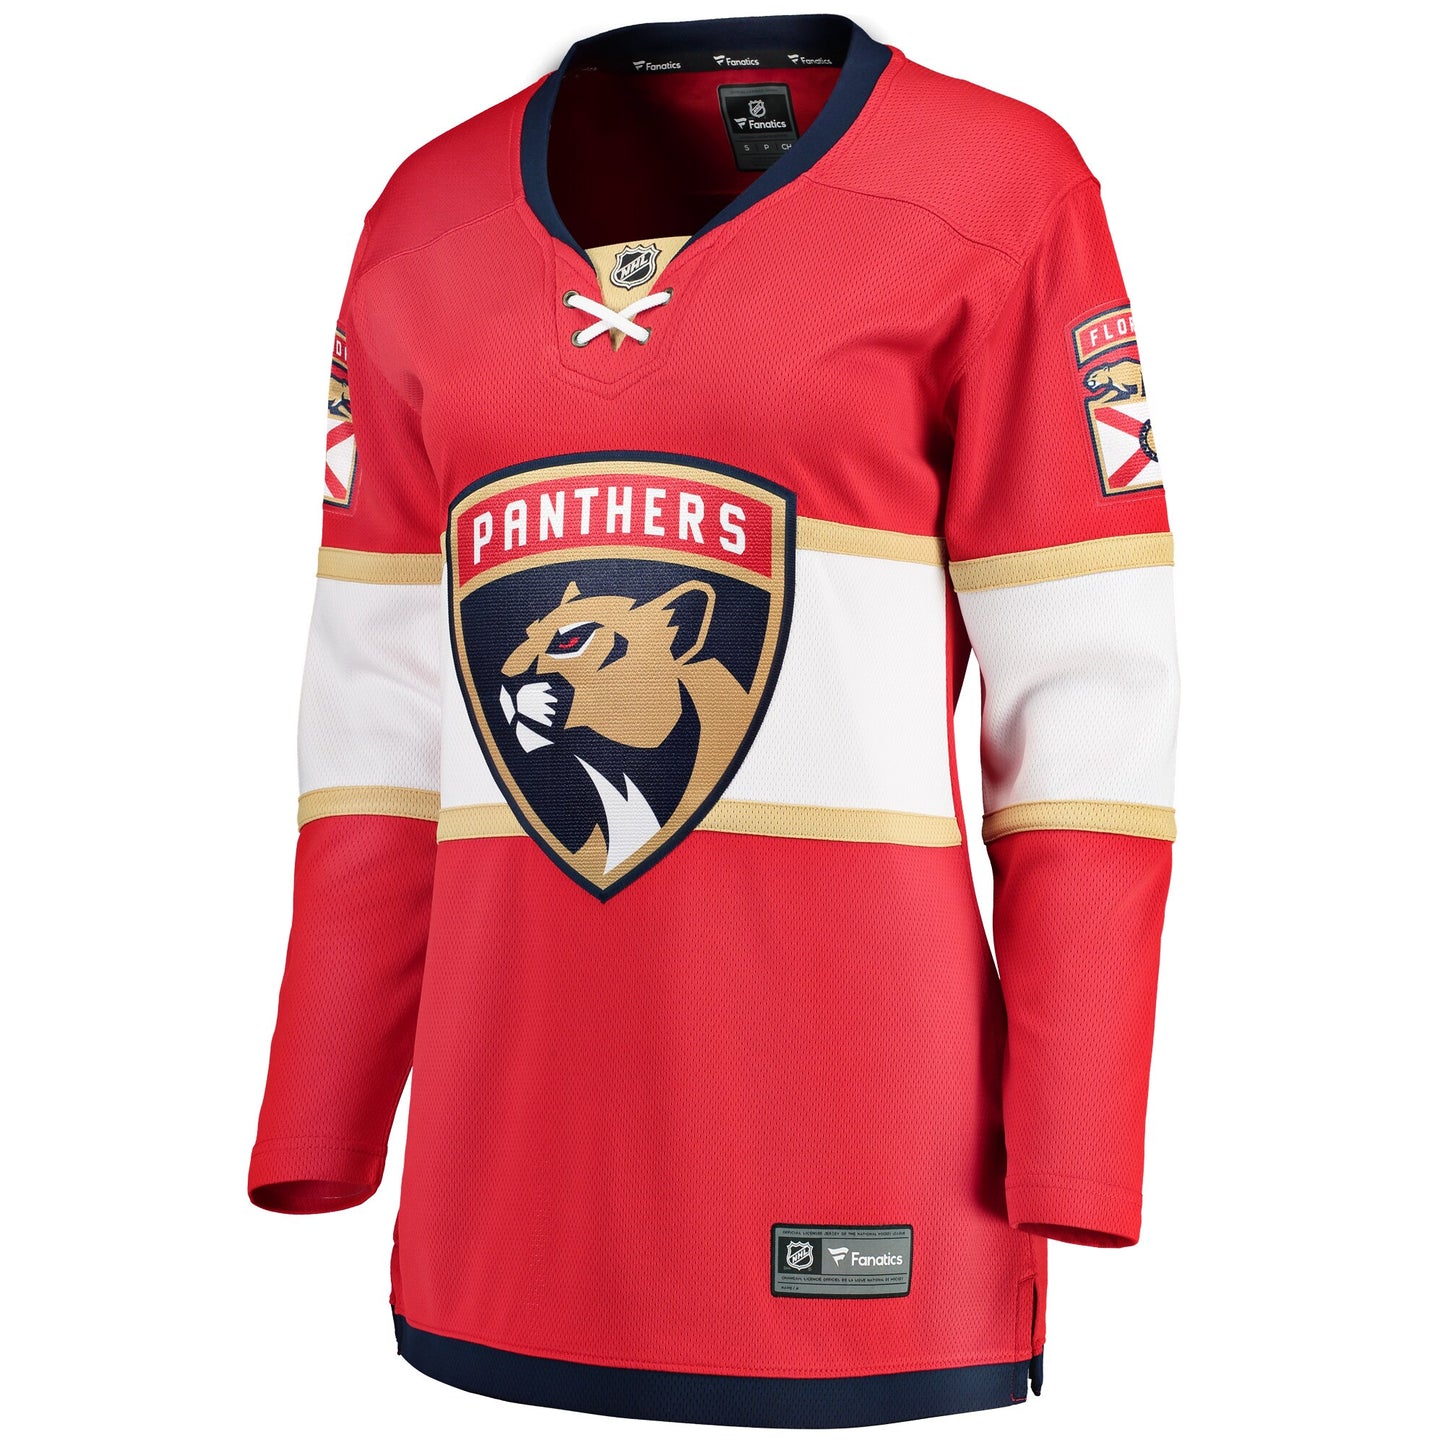 Florida Panthers Fanatics Branded Women's Breakaway Home Jersey - Red